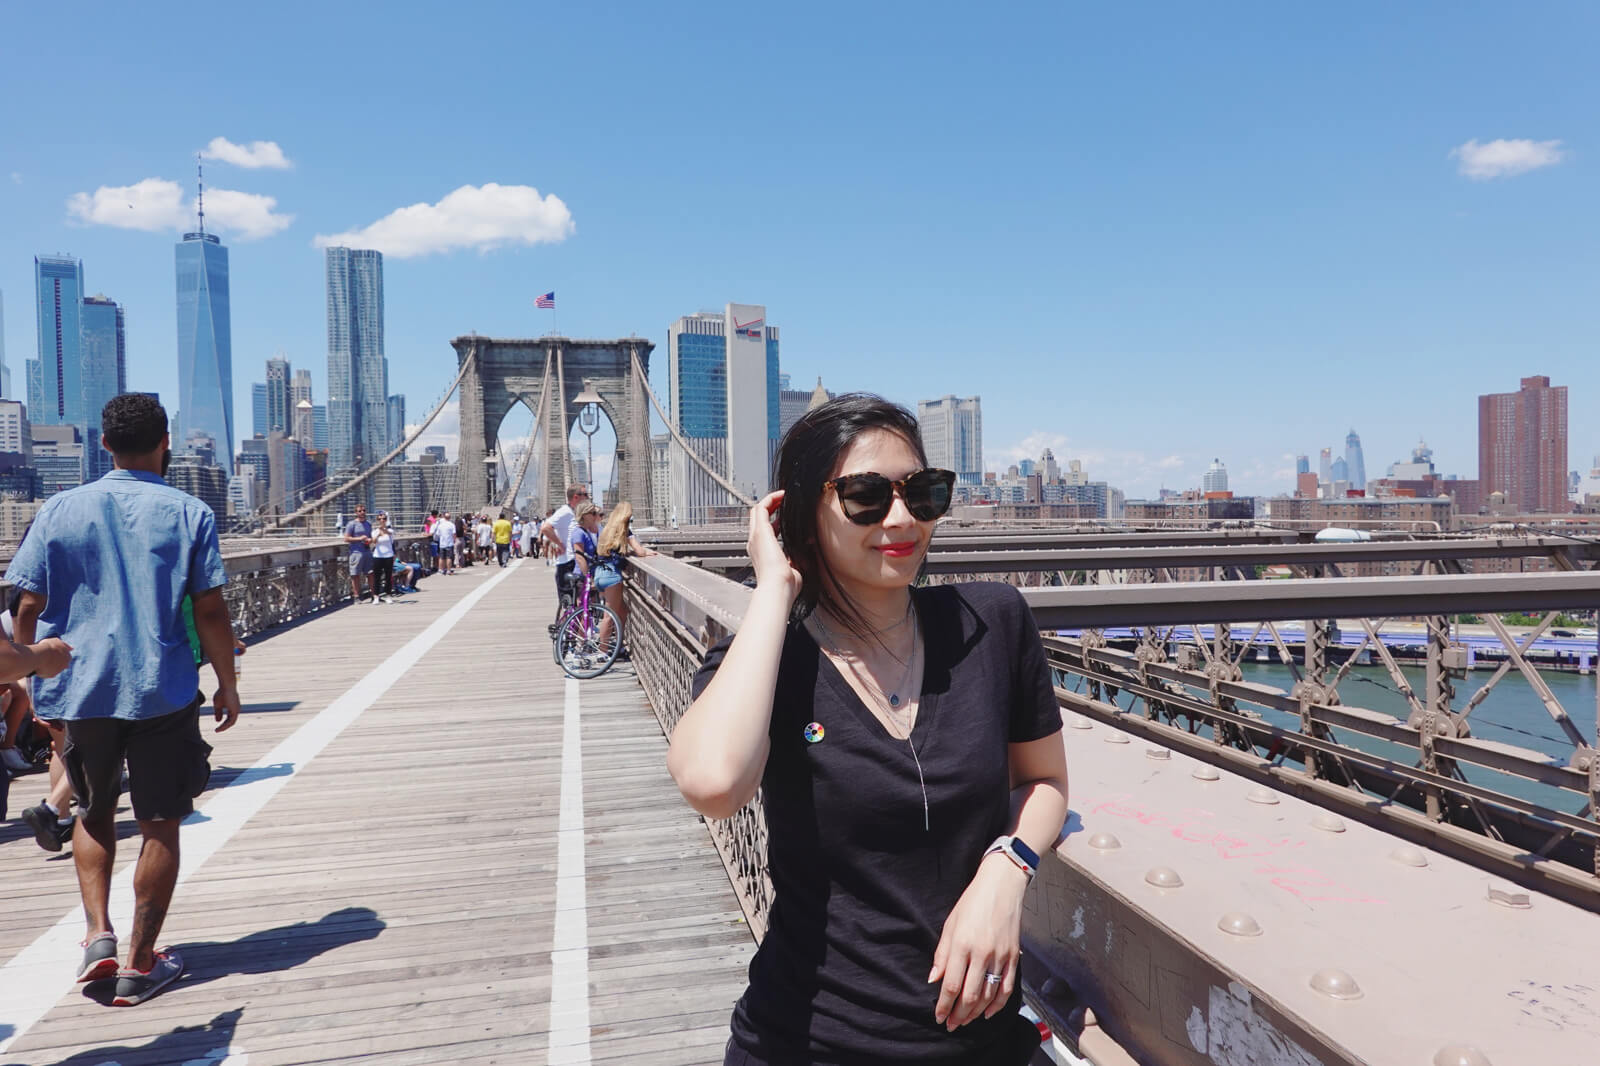 A woman in a black t-shirt, wearing sunglasses. She is standing on a bridge with high-rise buildings in the background. There are other people bicycling and standing on the bridge